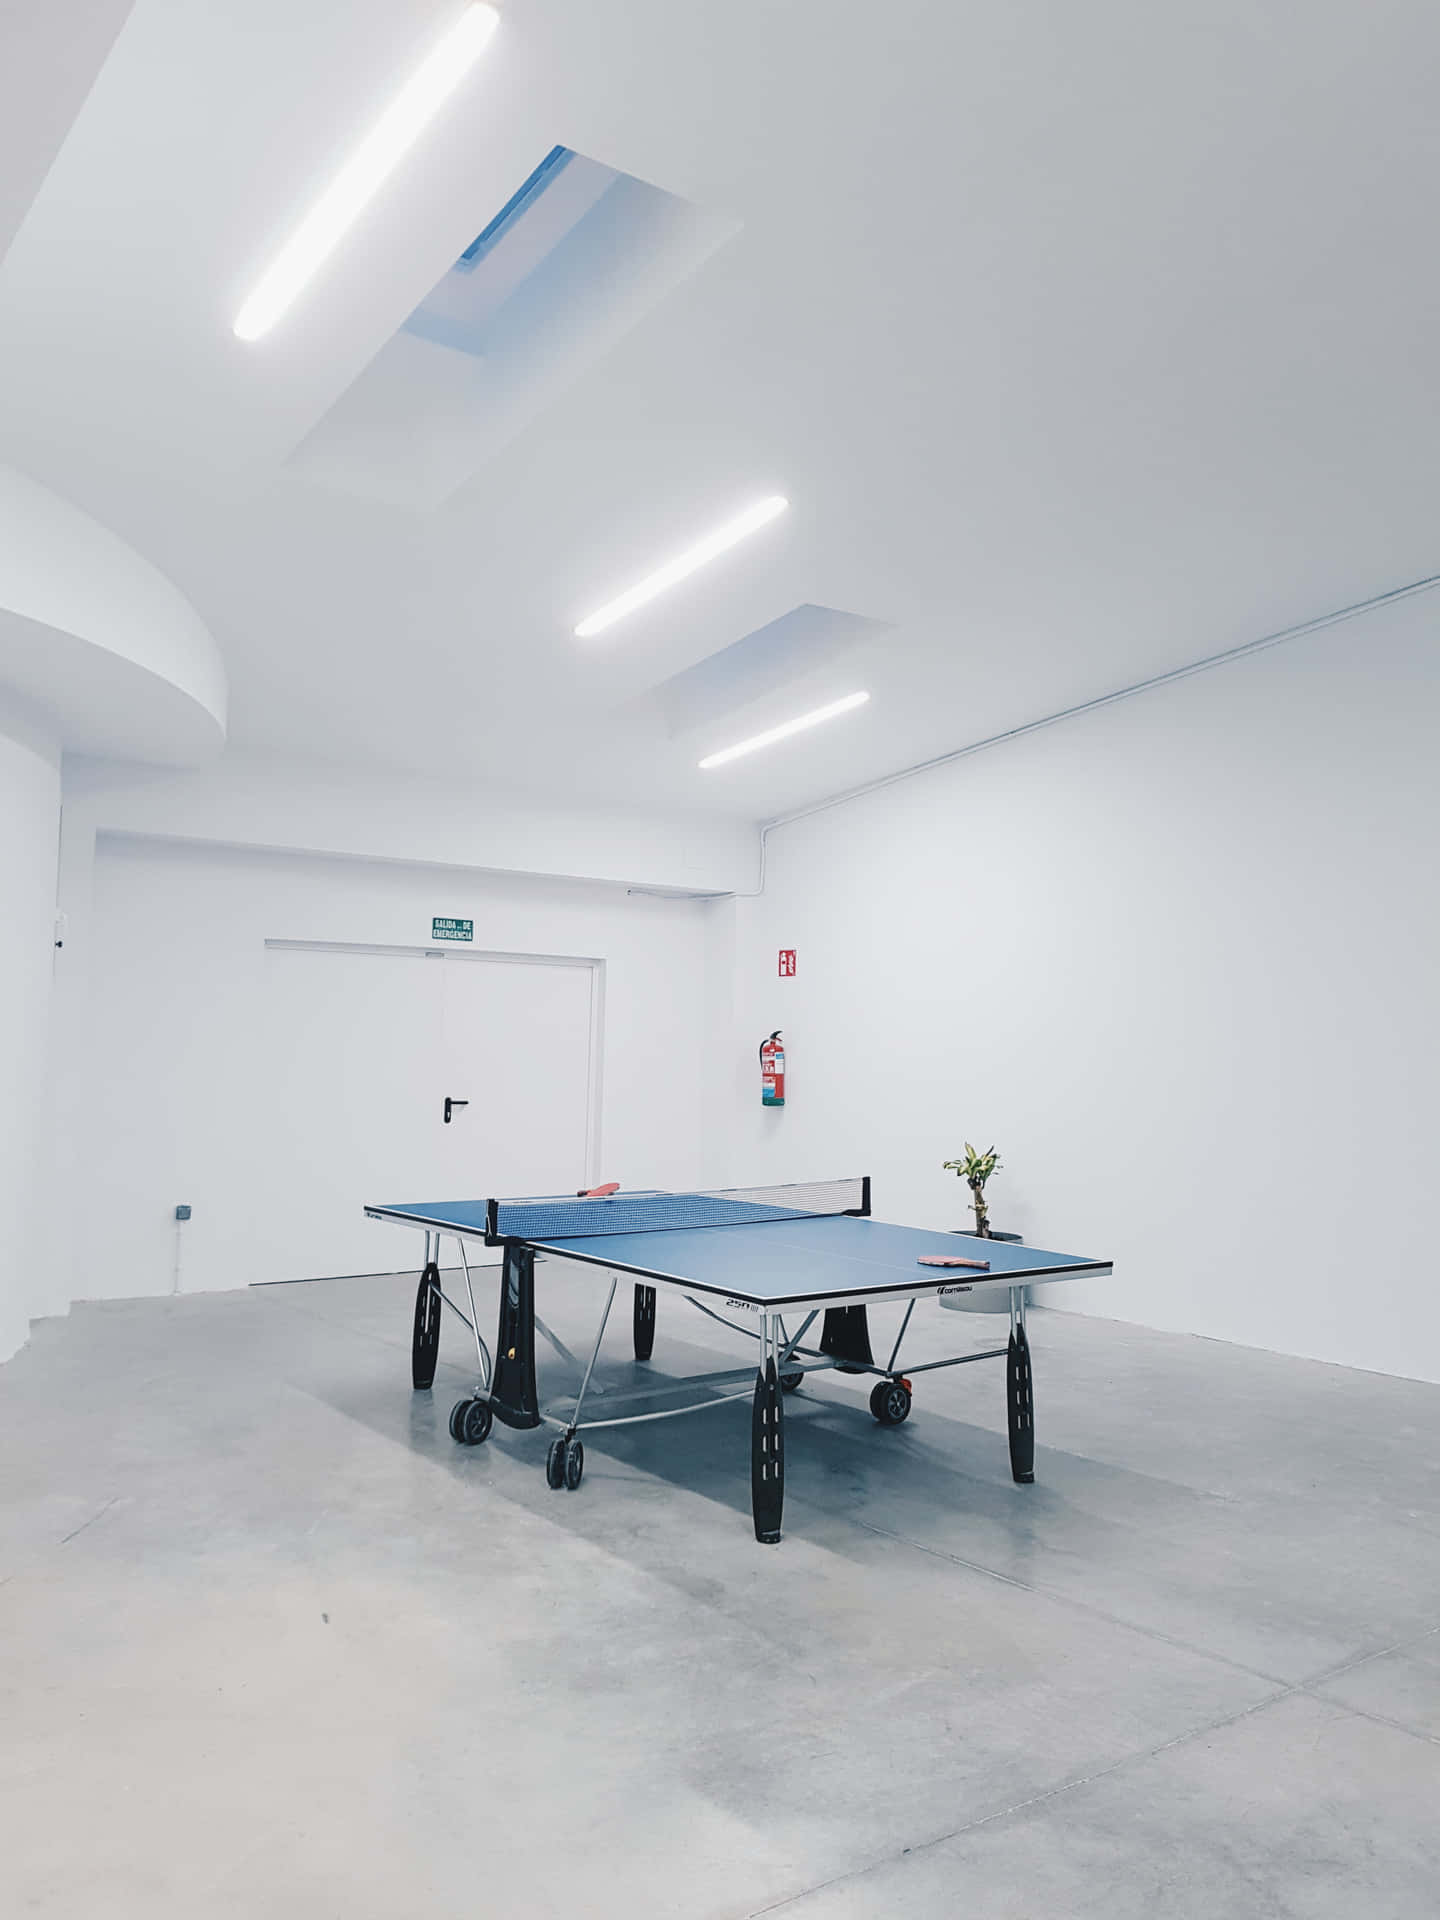 Get Ready for the Ultimate Table Tennis Adventure